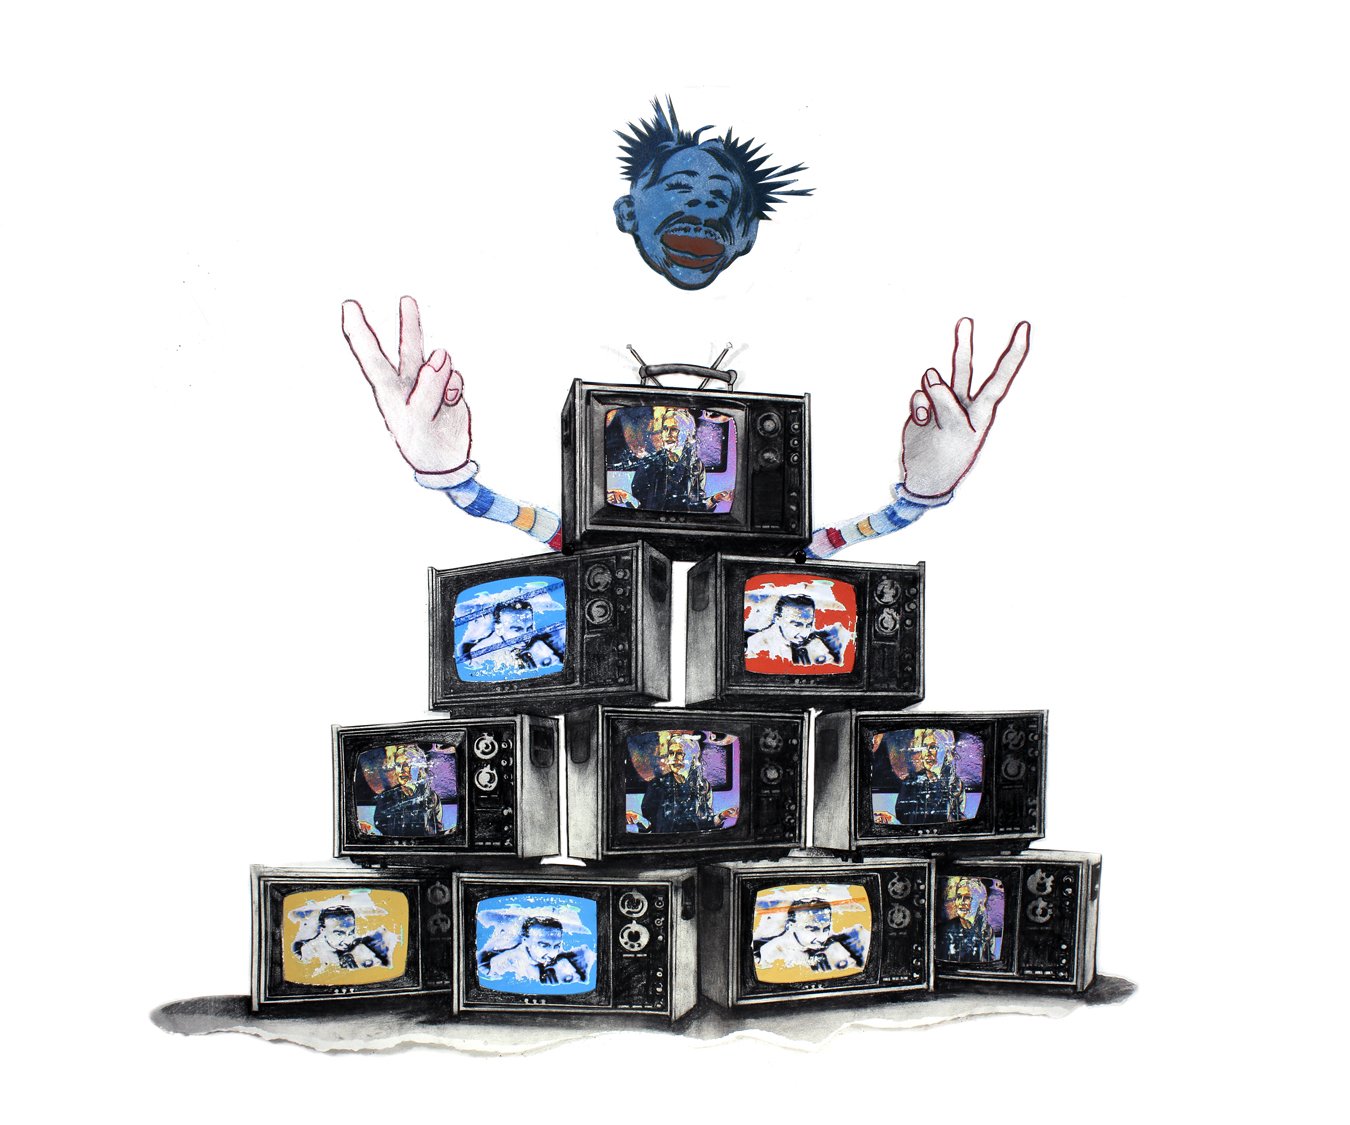 TV stack with blue head, charcoal, carbon &amp; coloured pencil, spray paint through hand cut stencils, digitally manipulated imagery on abused paper. Approx. 36” x 36”. 2023